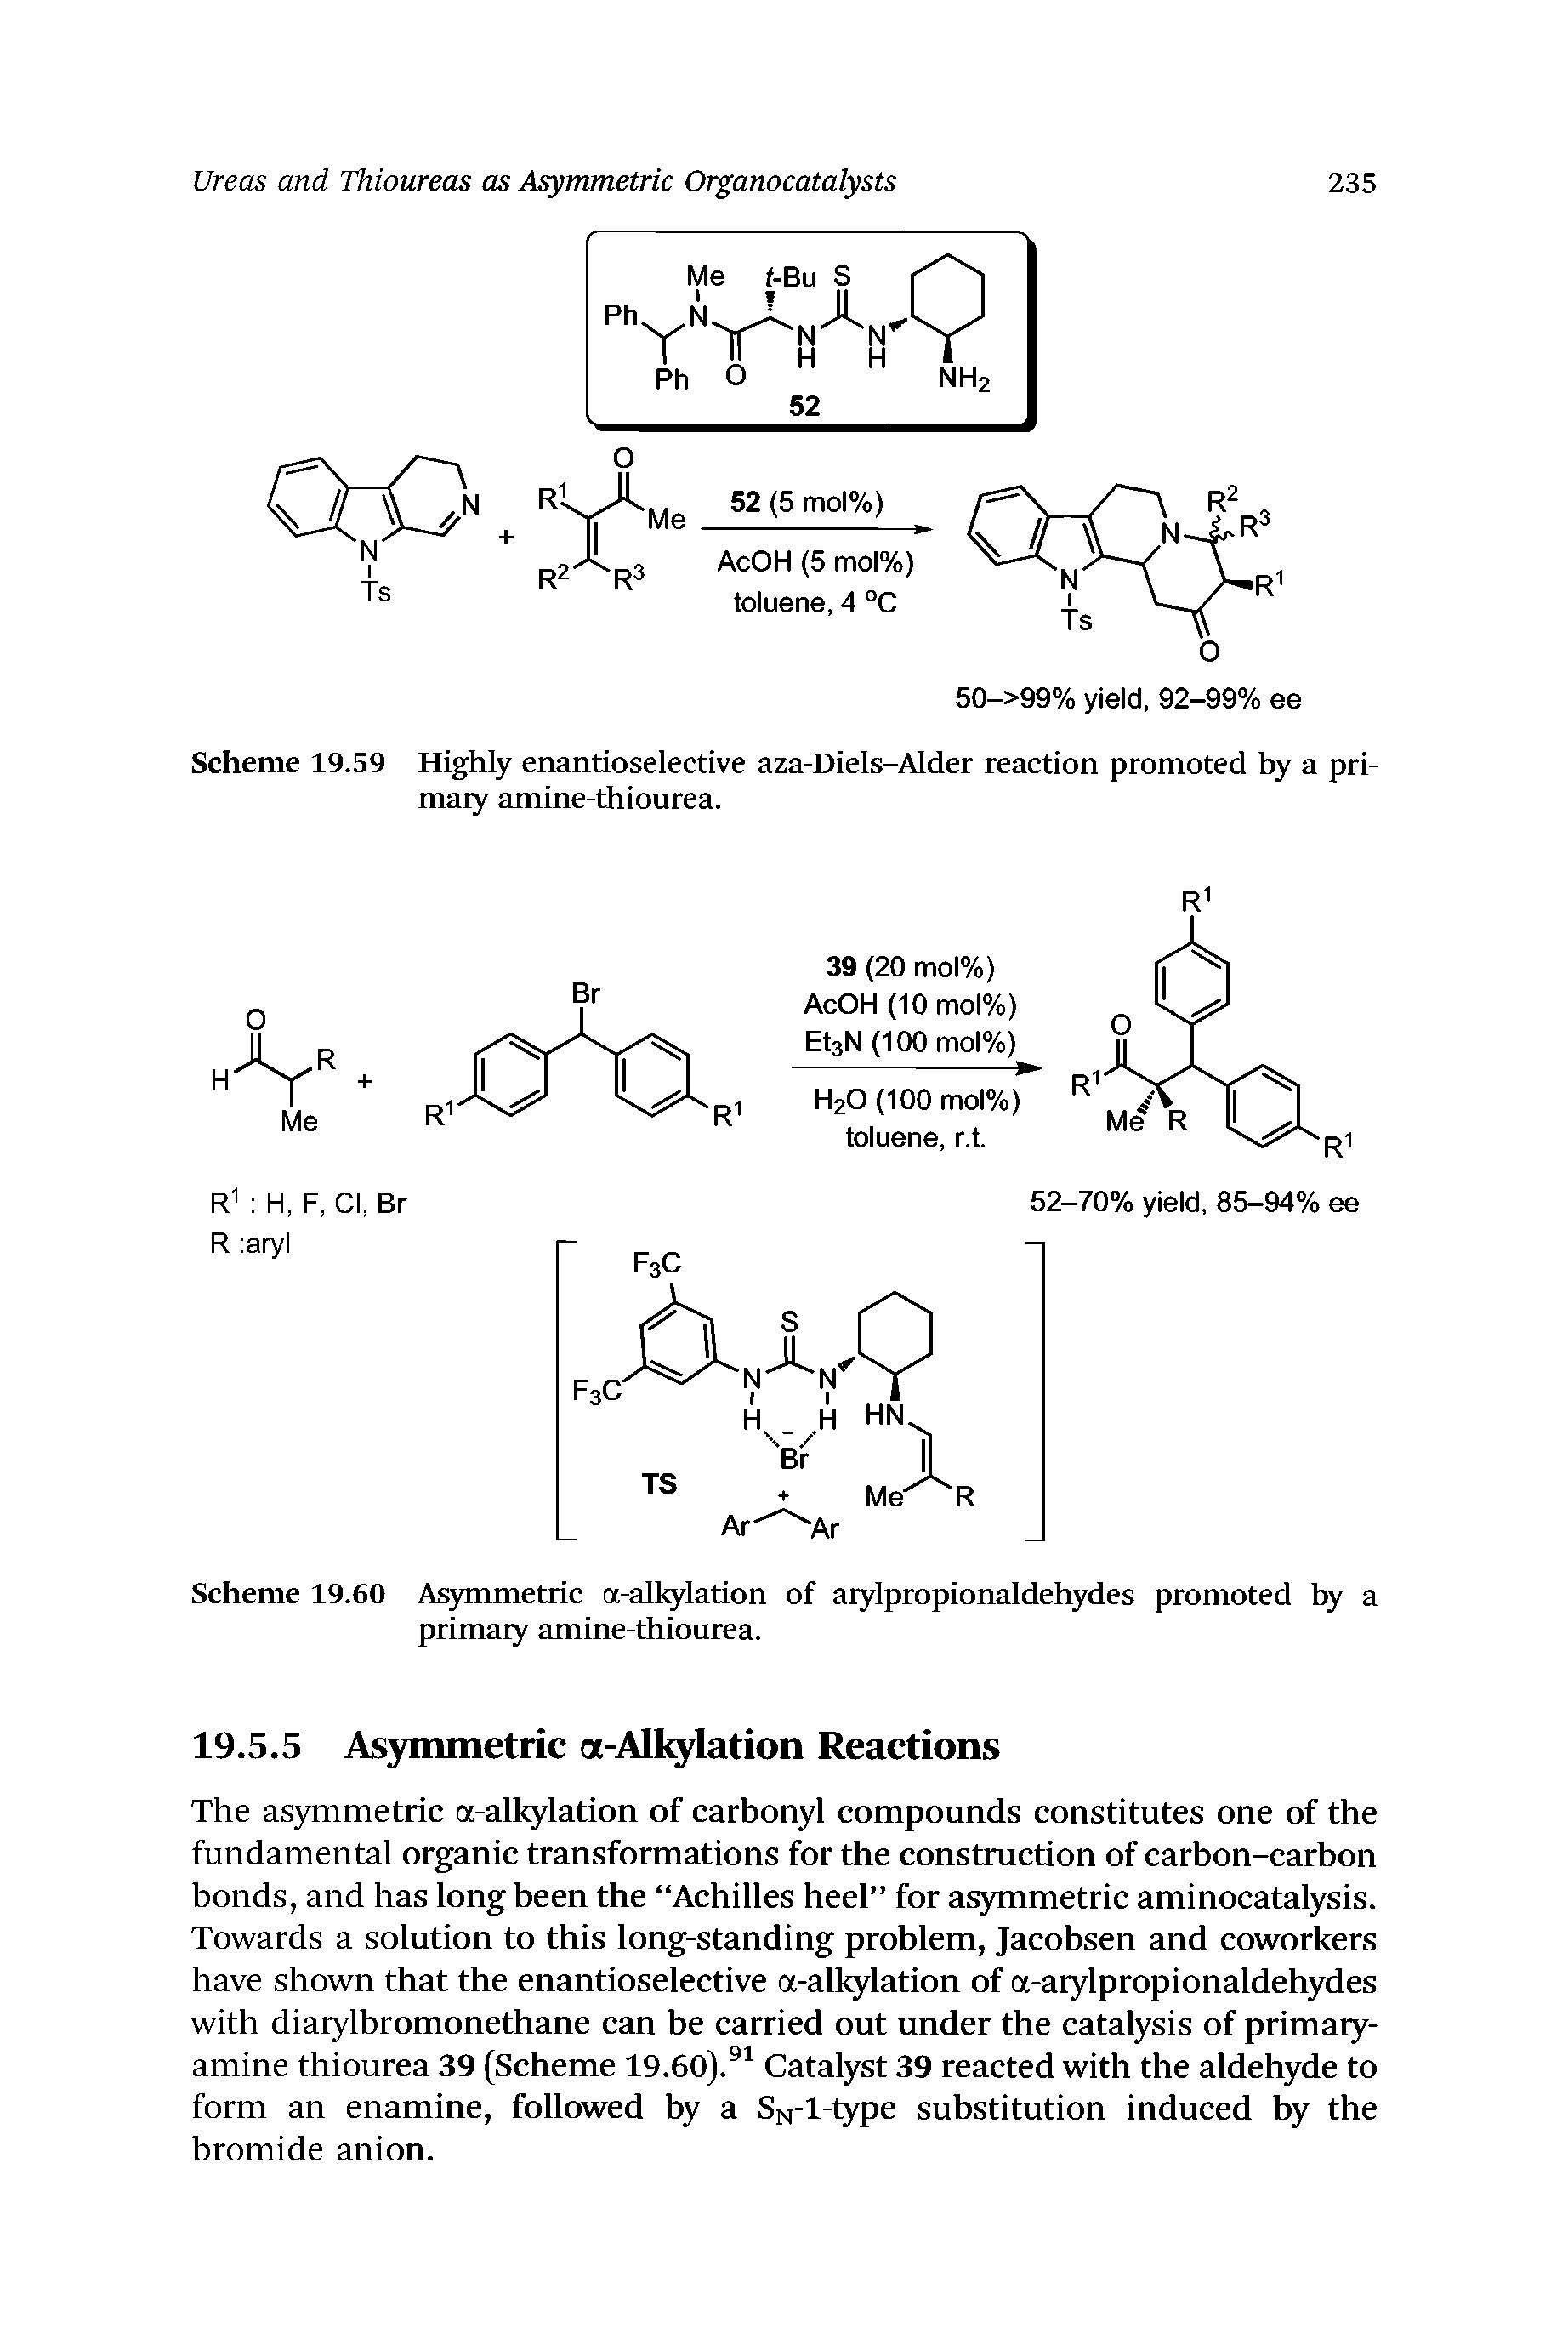 Scheme 19.59 Highly enantioselective aza-Diels-Alder reaction promoted by a primary amine-thiourea.